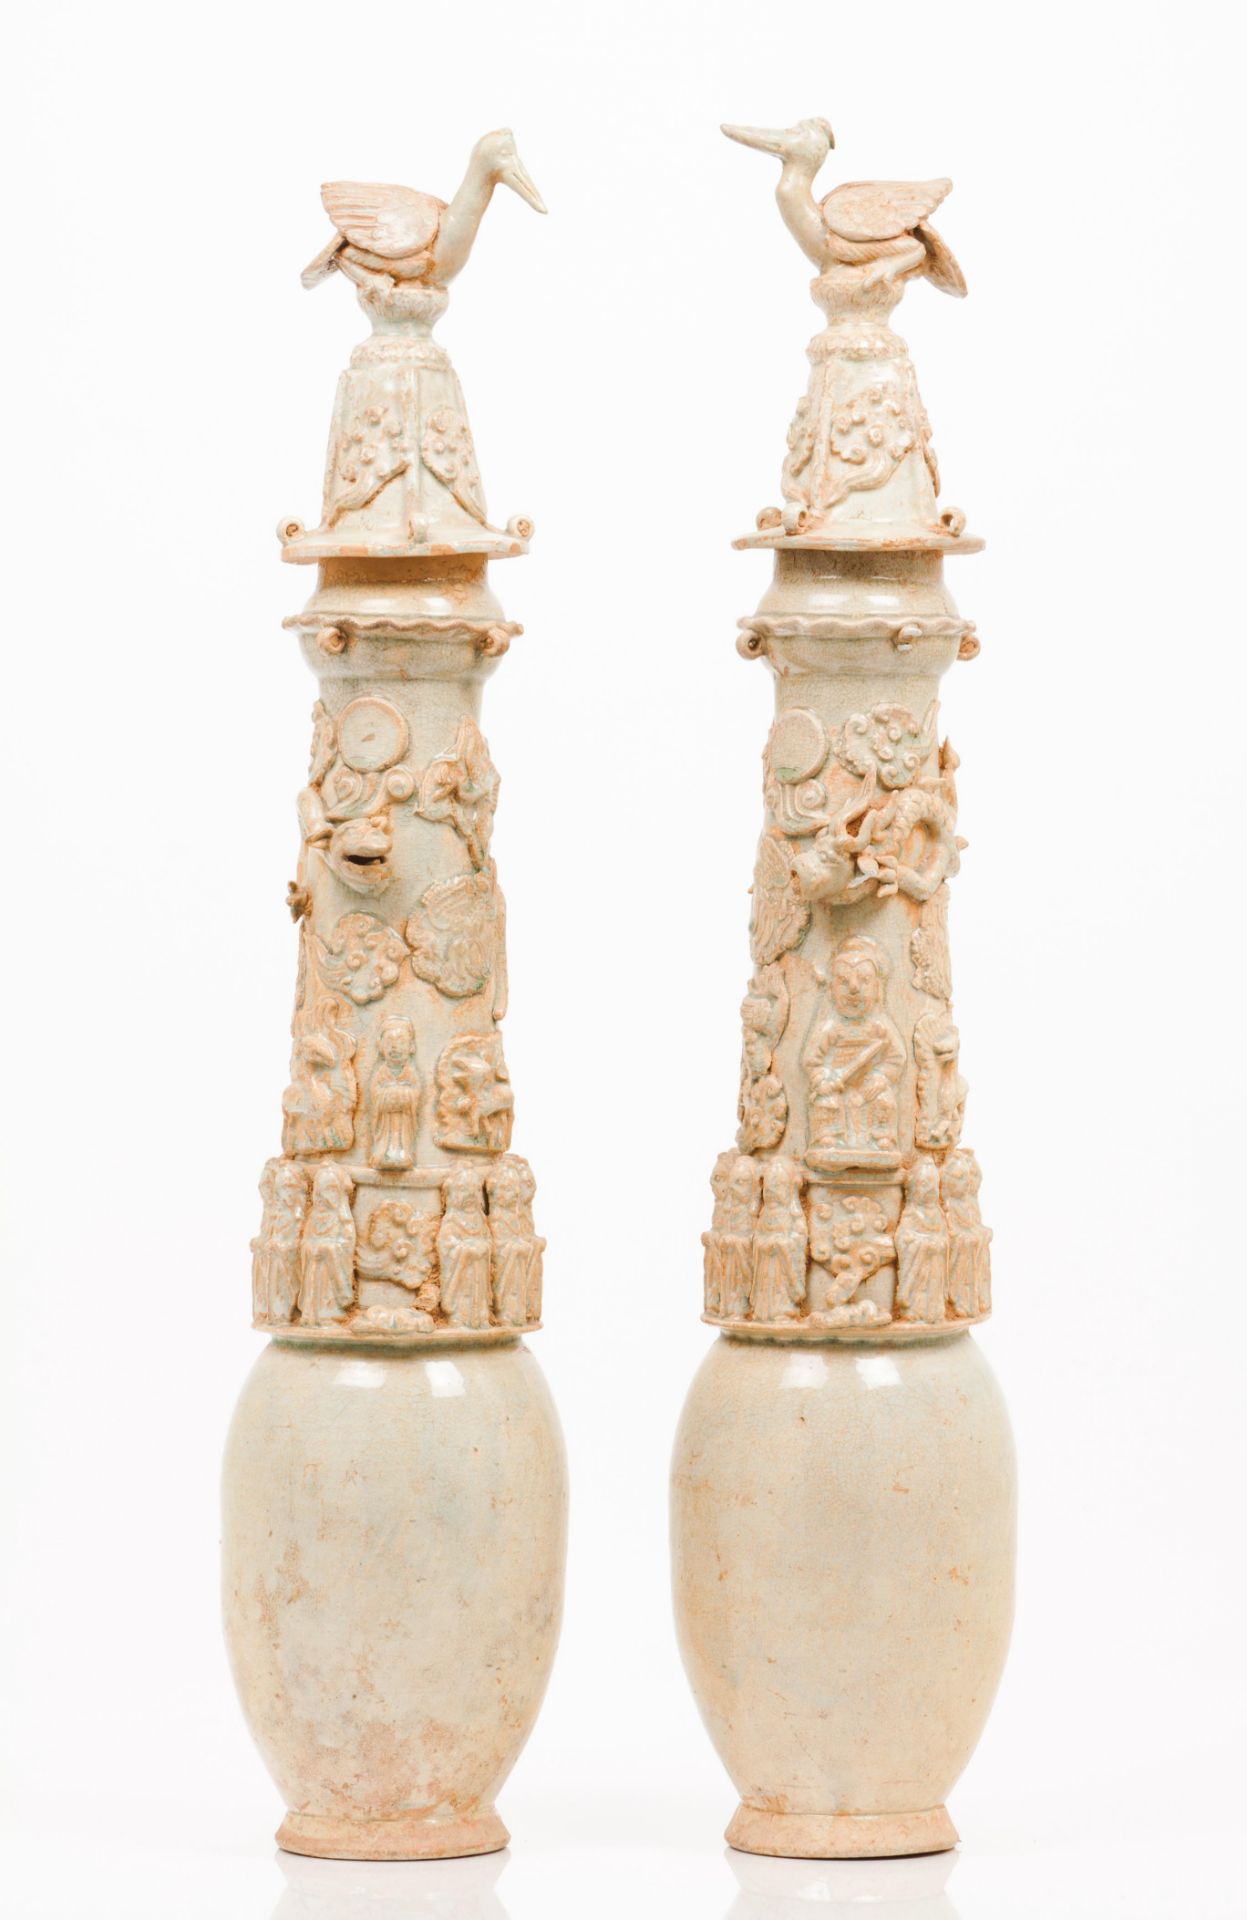 A pair of funerary vases with covers